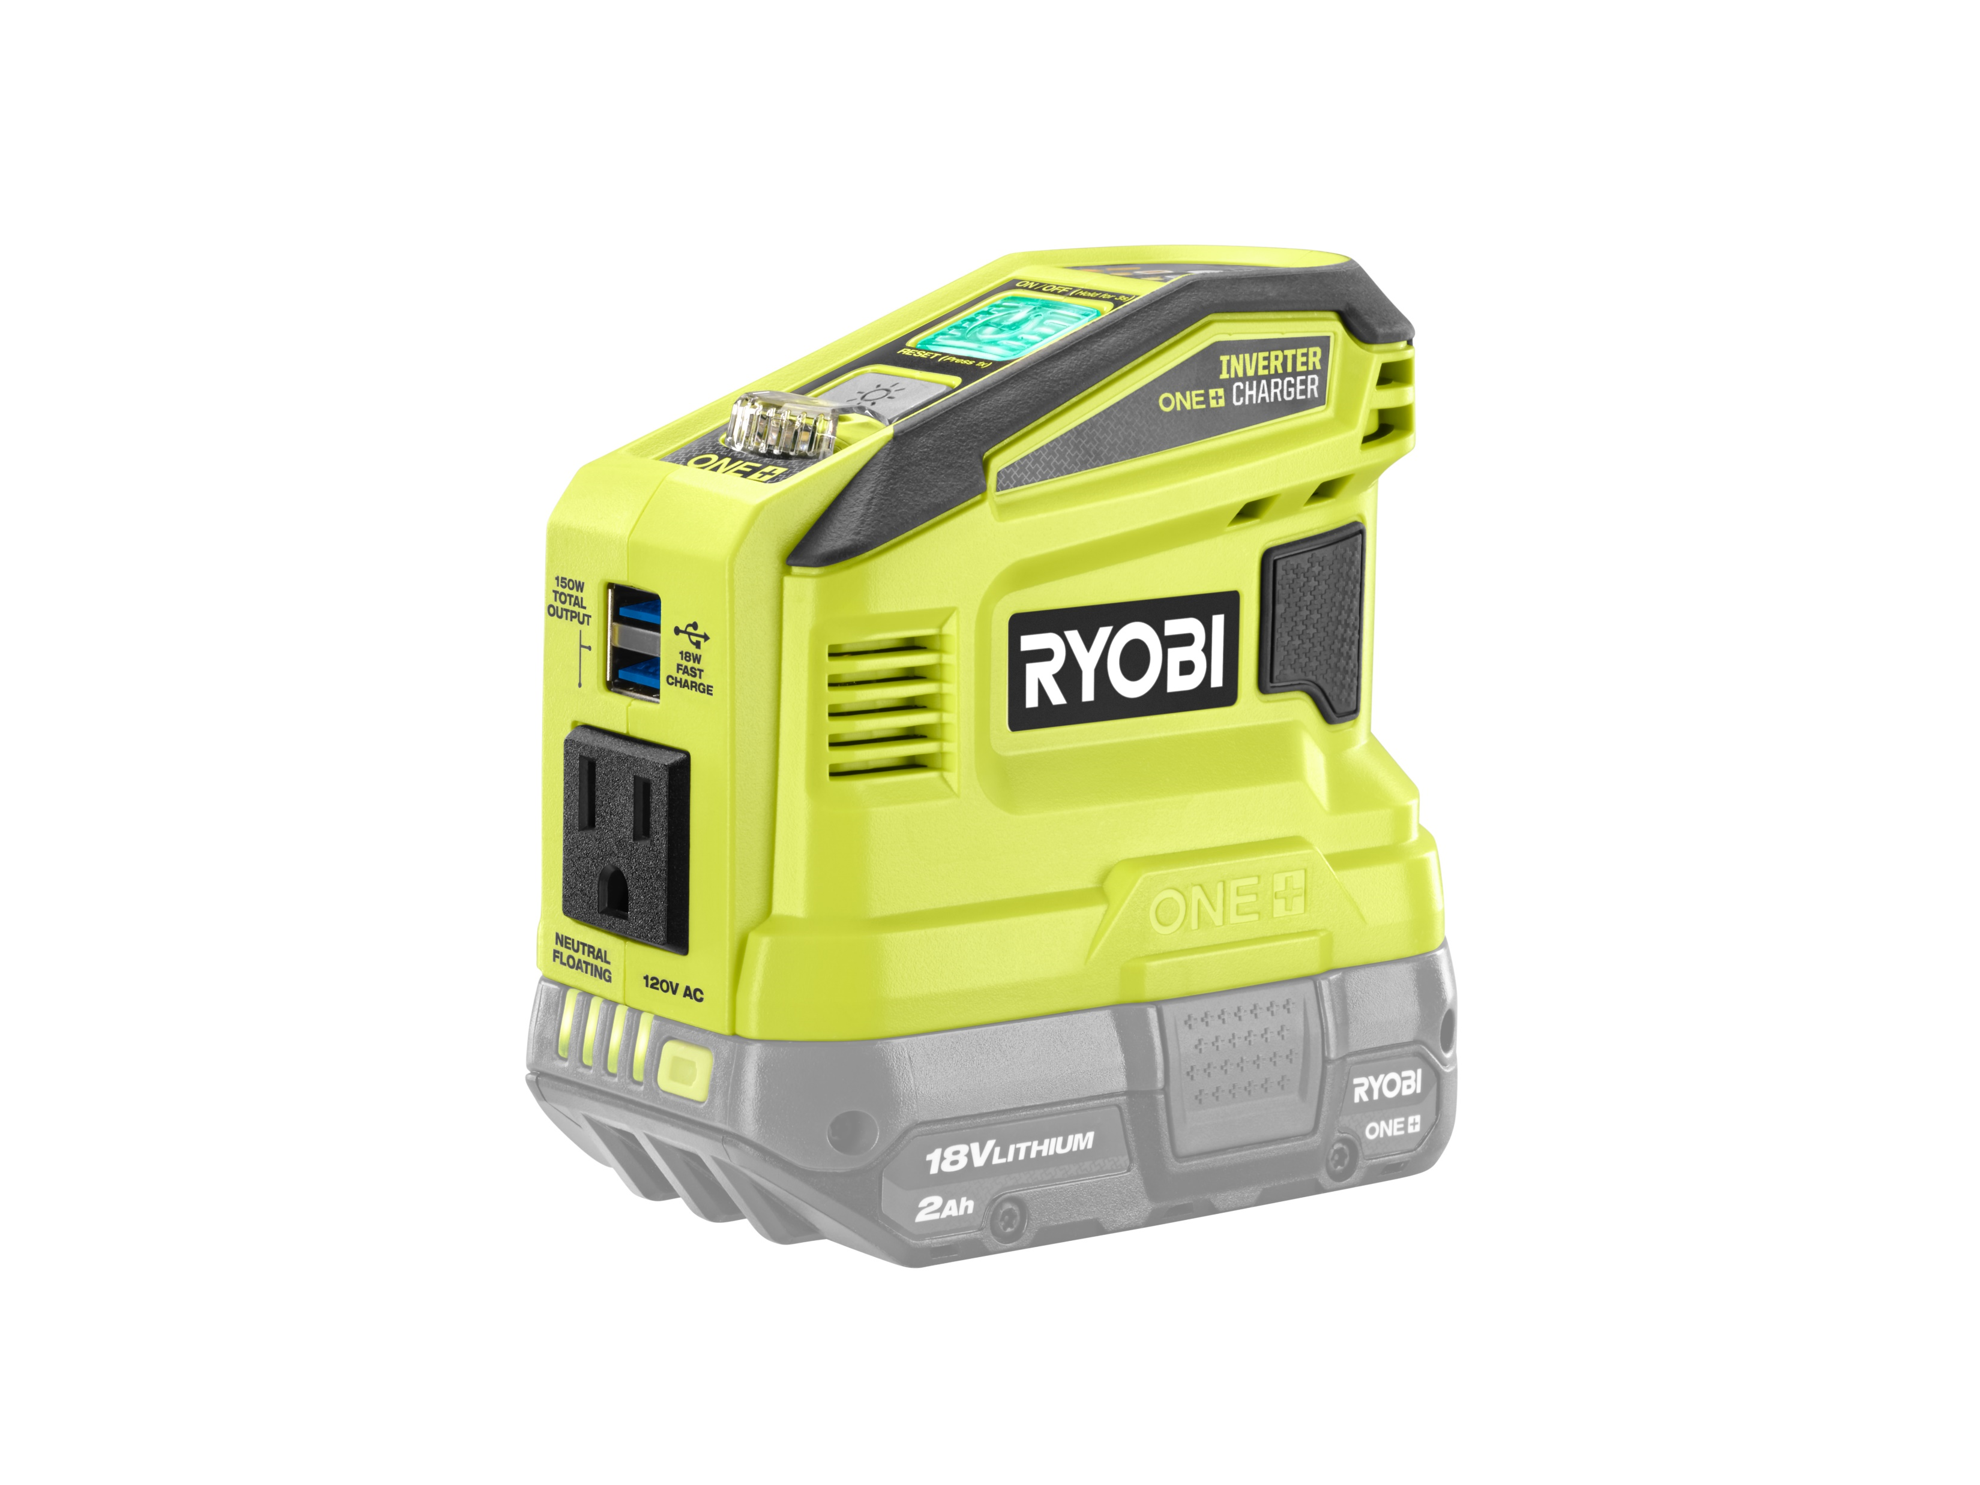 Photo: Charges All RYOBI One+ 18-Volt batteries